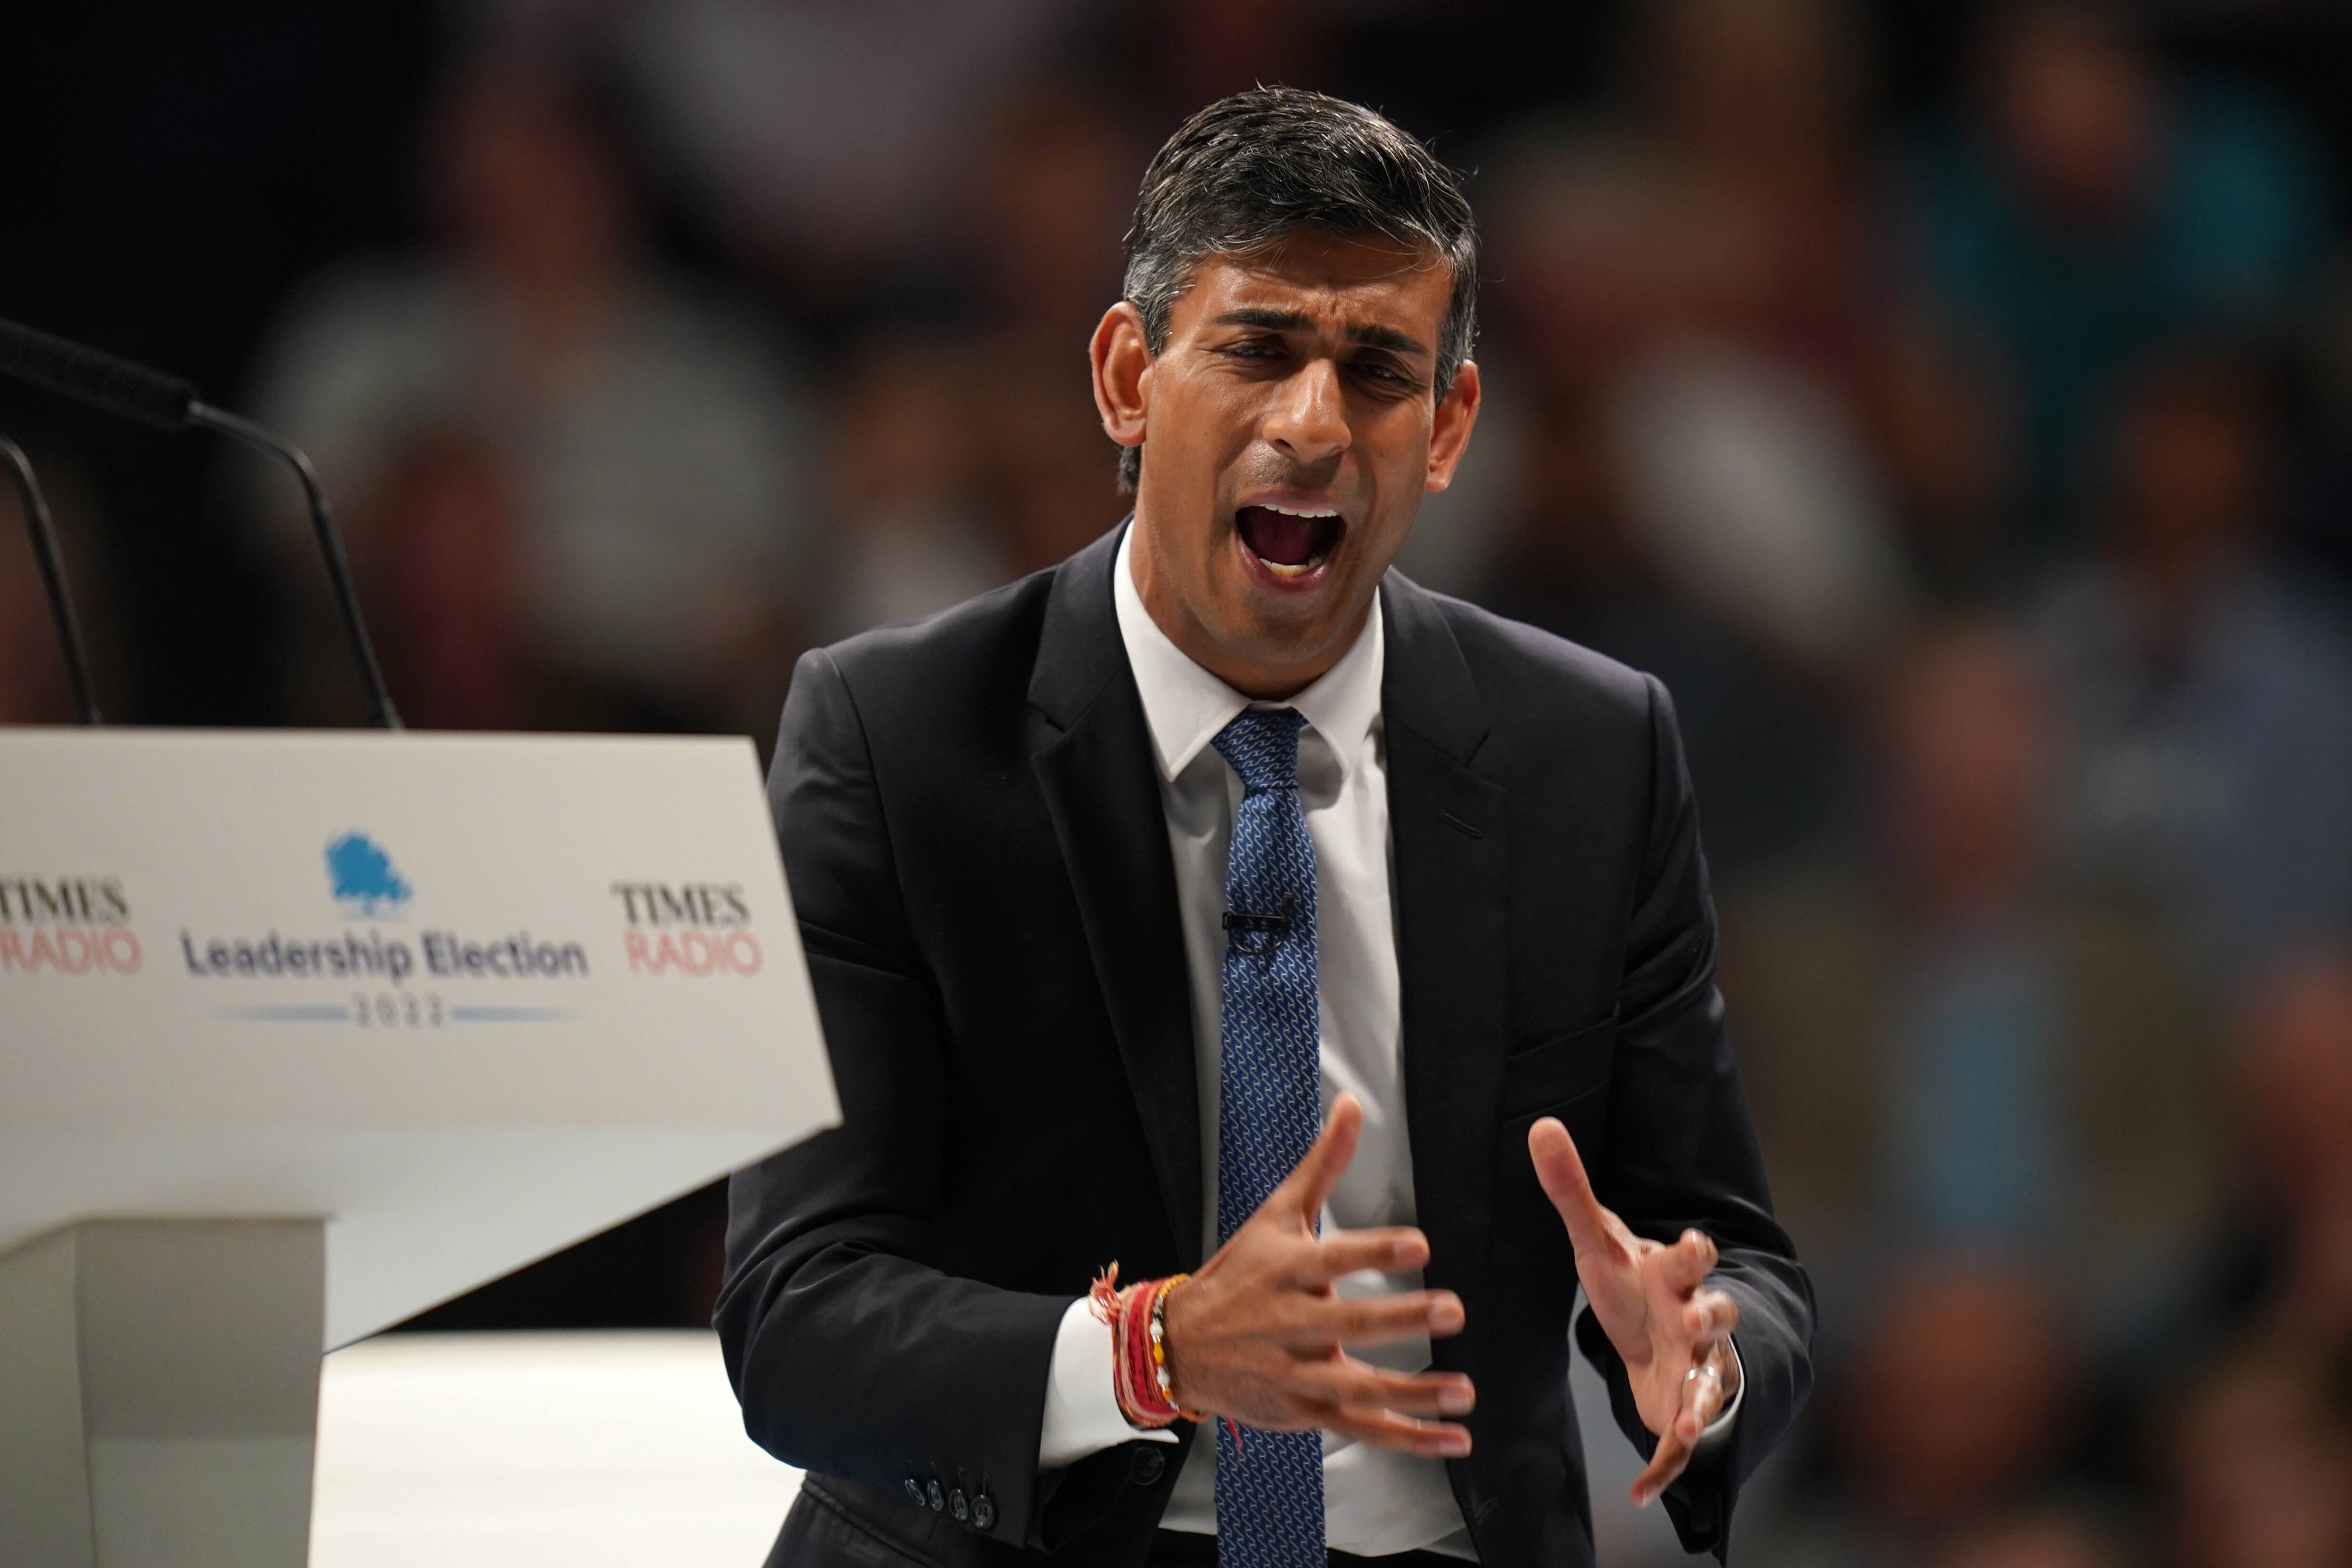 Rishi Sunak speaking during a hustings event at the NEC in Birmingham as part of his campaign to be leader of the Conservative Party and the next prime minister (Jacob King/PA)